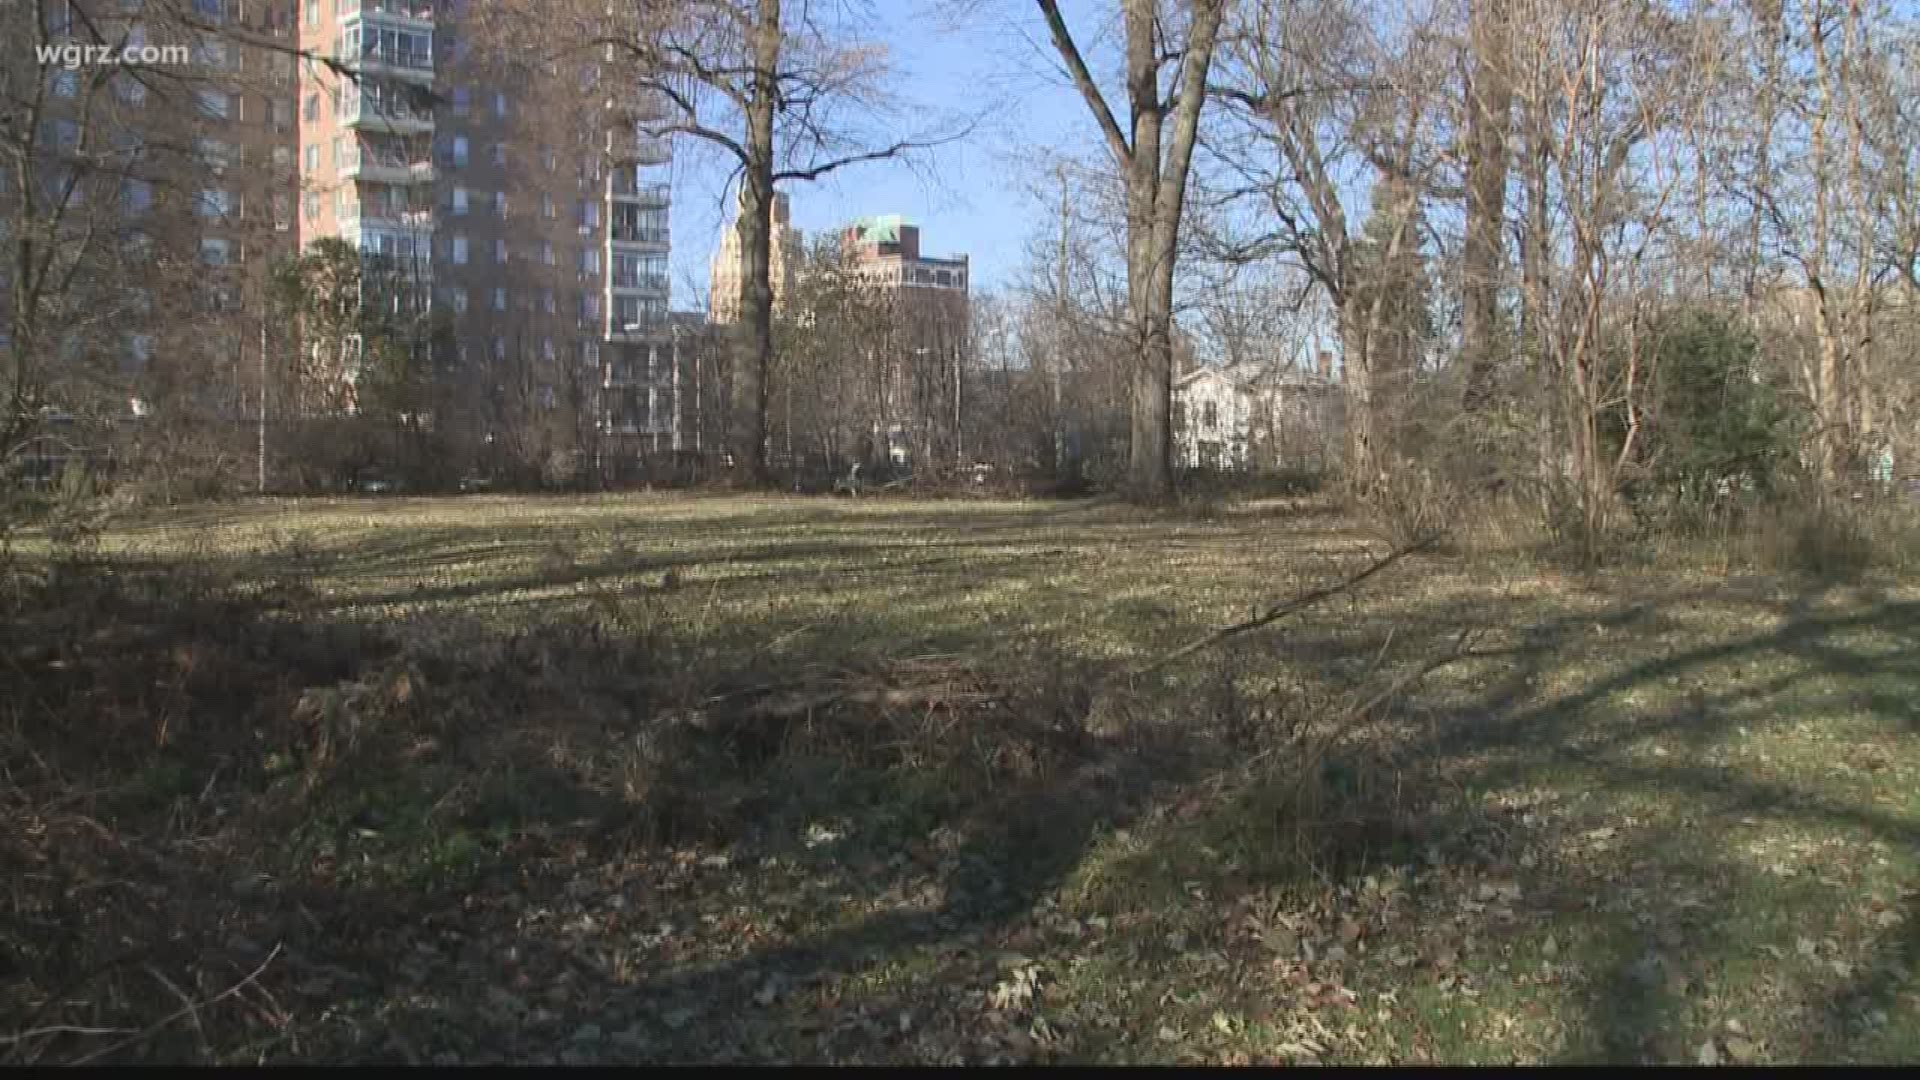 State Pays $850K For Vacant Lot In Falls